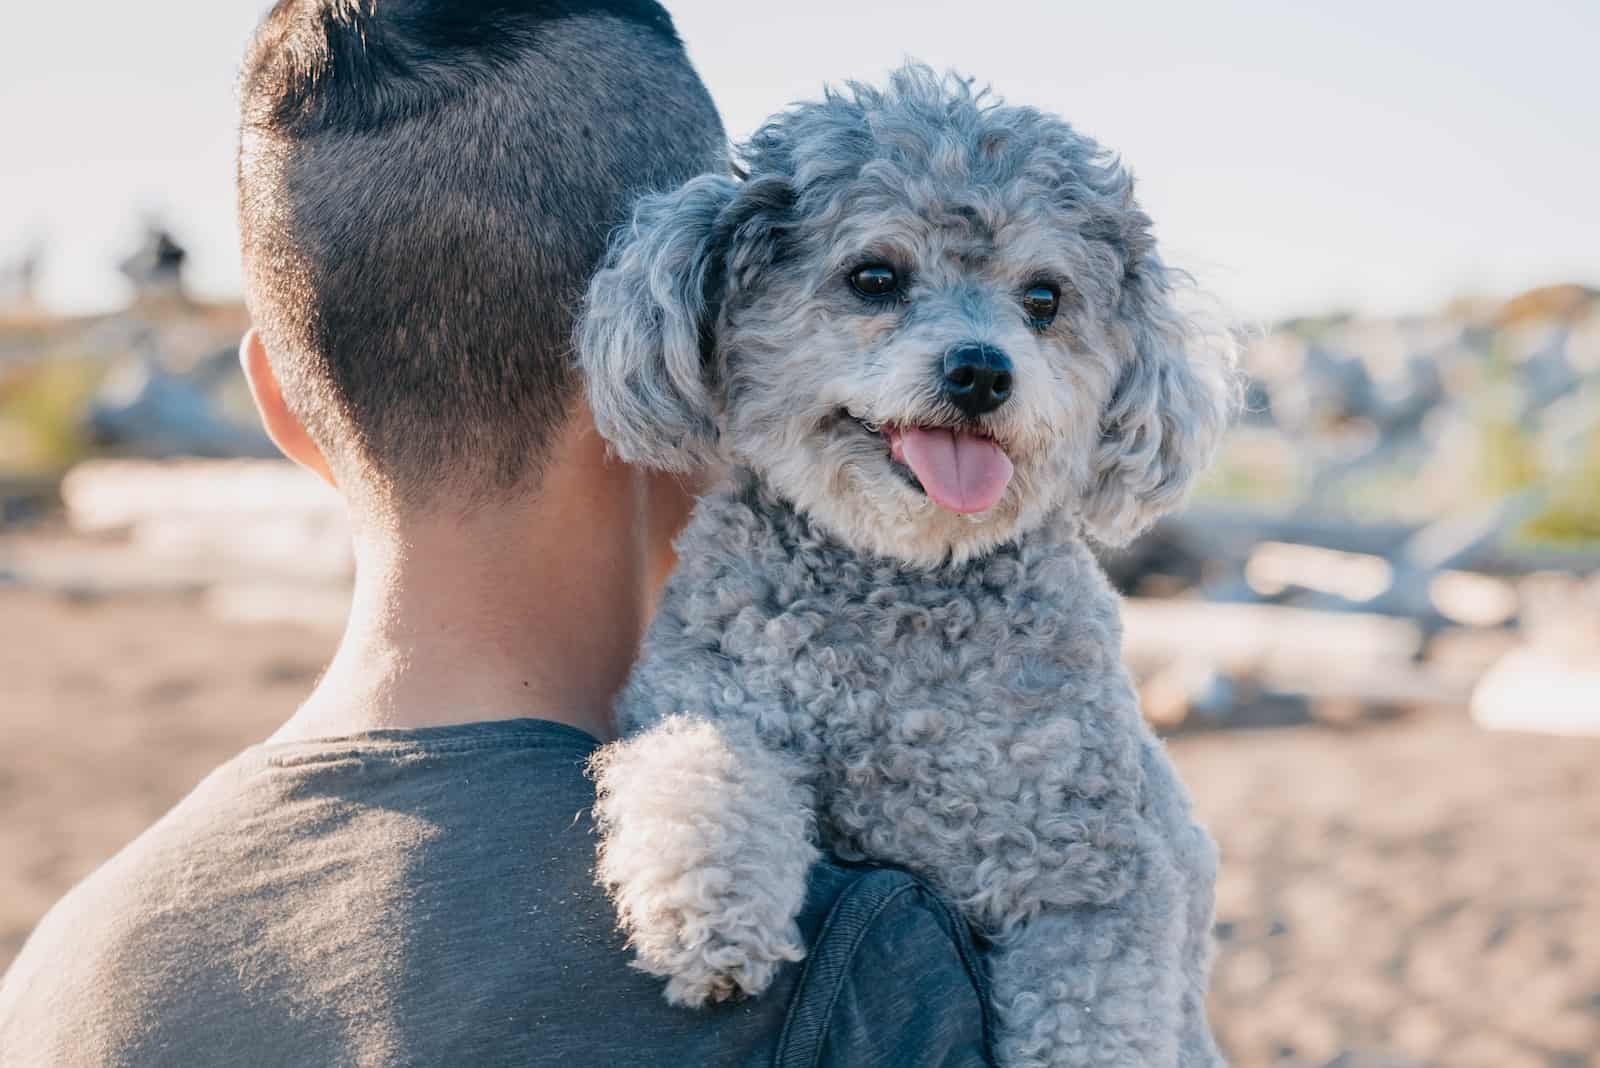 A Cute Gray Poodle Carried by a Person